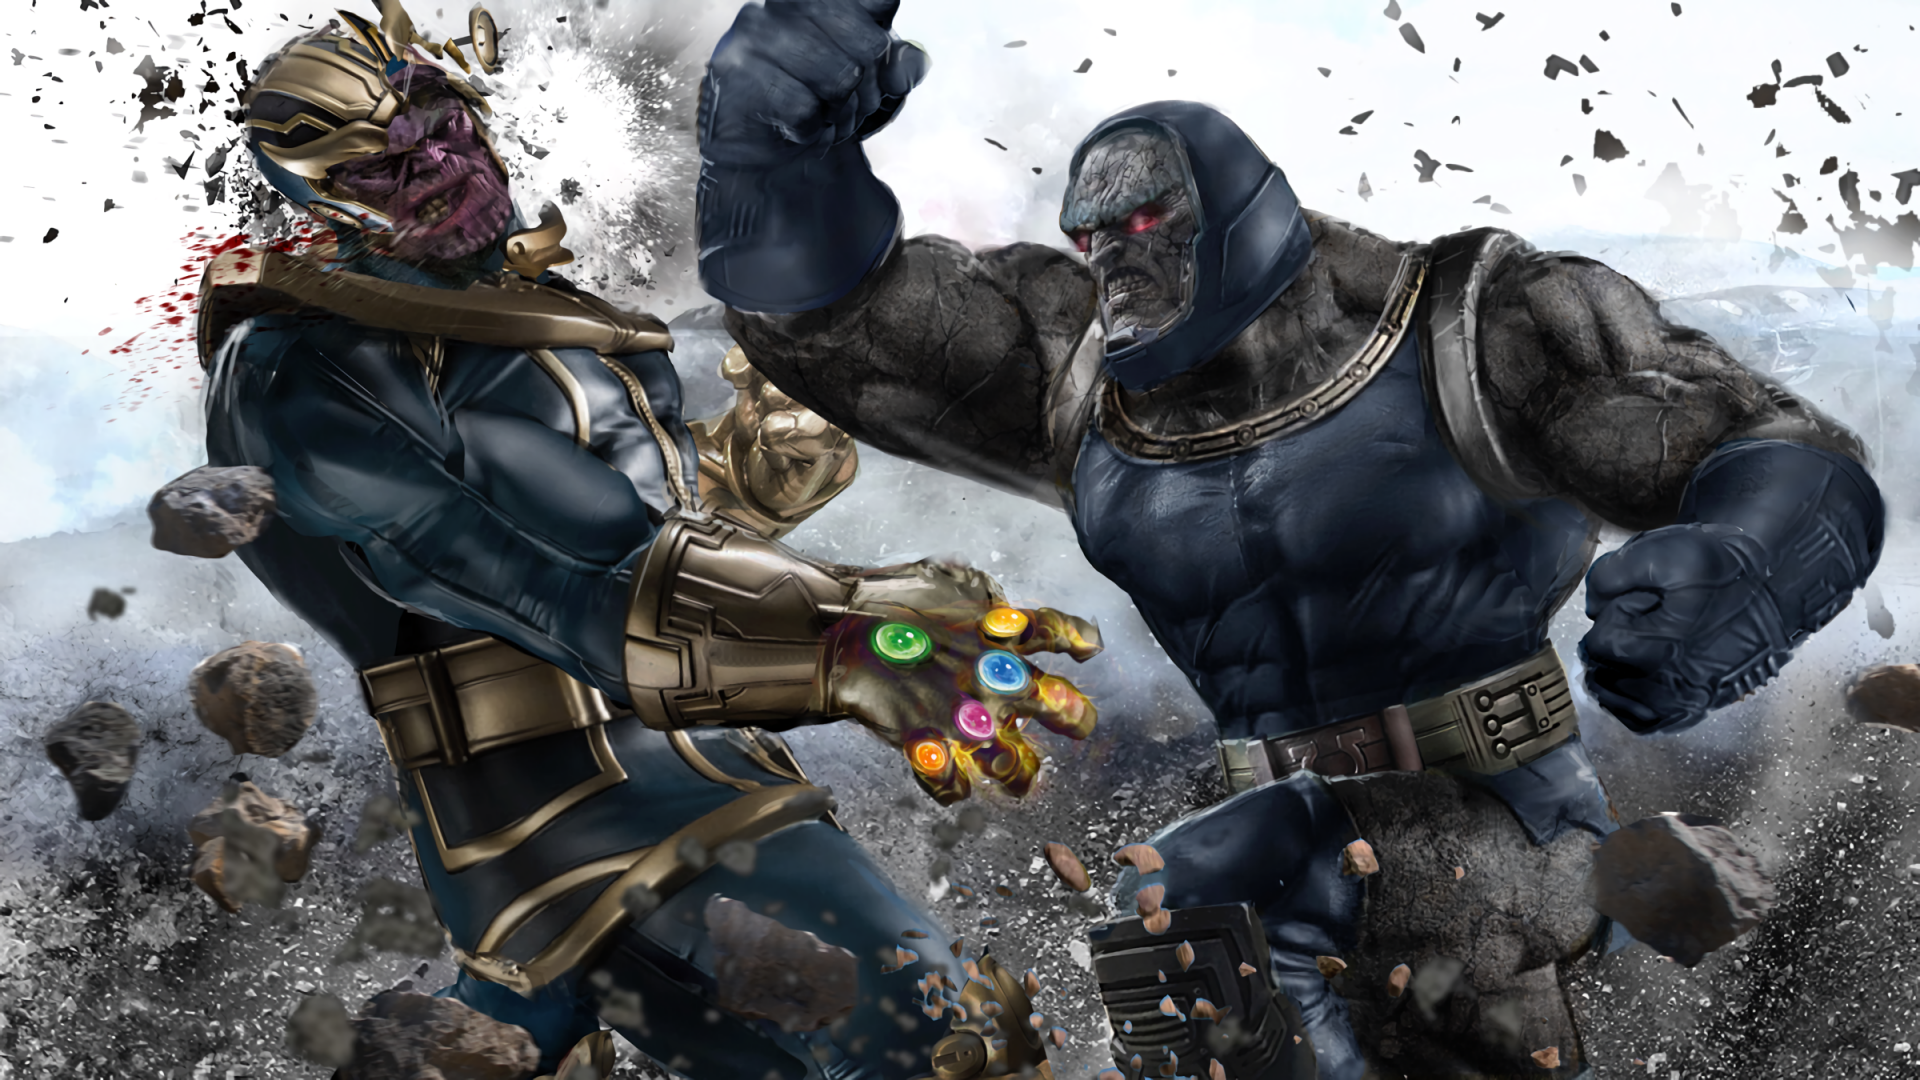 Download 1920x1080 Thanos, Darkseid, Crossover, Marvel, Dc Universe, Comics Wallpaper for Widescreen